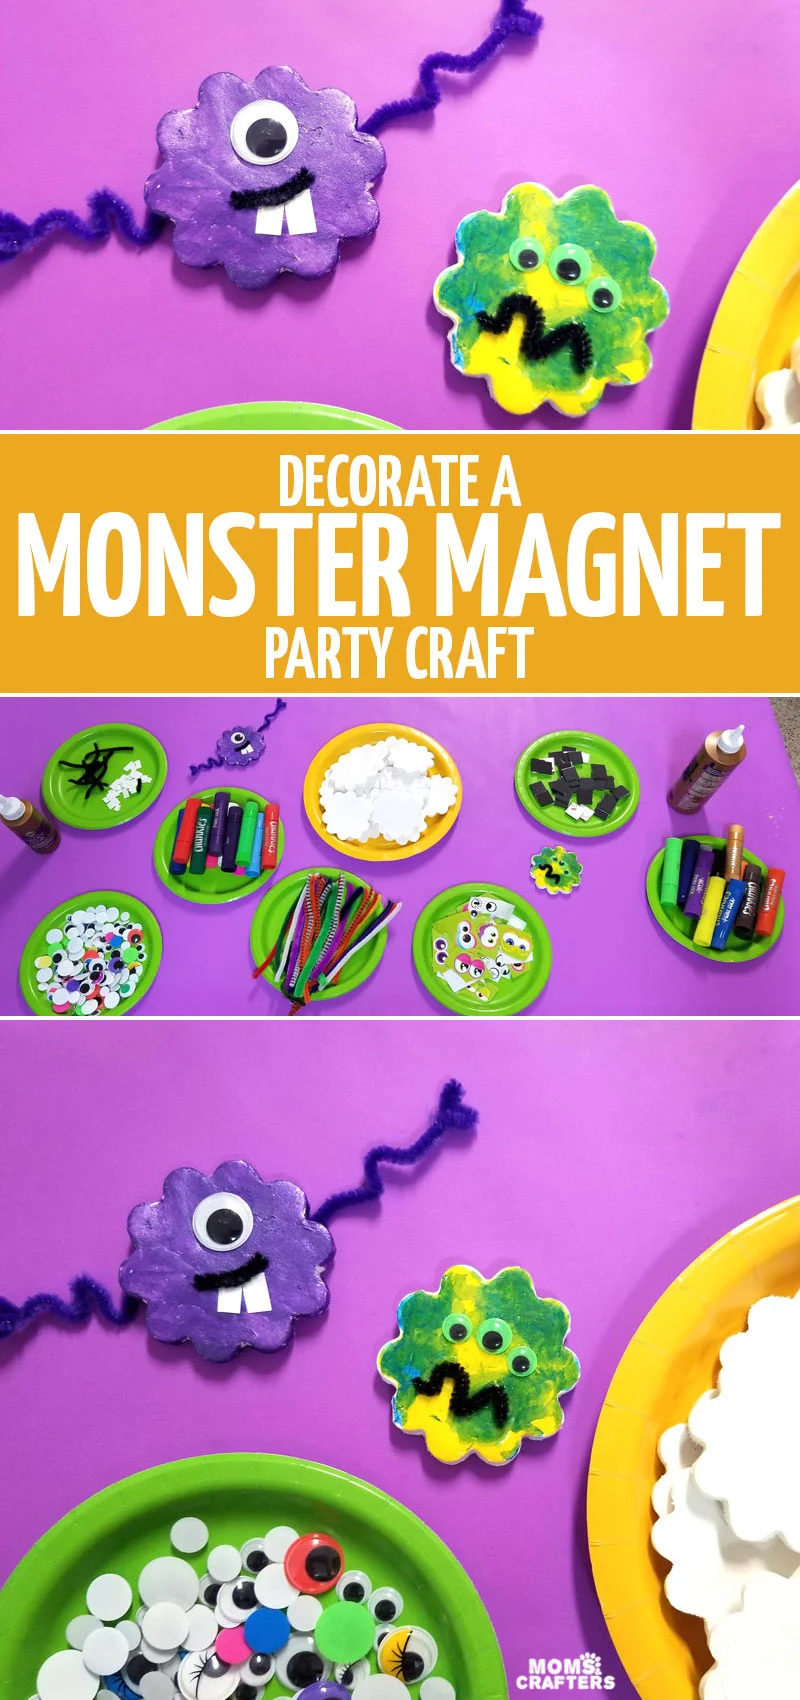 click to learn how we made this monster craft - DIY magnets - at our monster themed third birthday party! This fun monster party activity is a great take-home souvenir, Halloween craft, or make it for fun. It's good for toddlers, preschoolers, and kids of all ages!